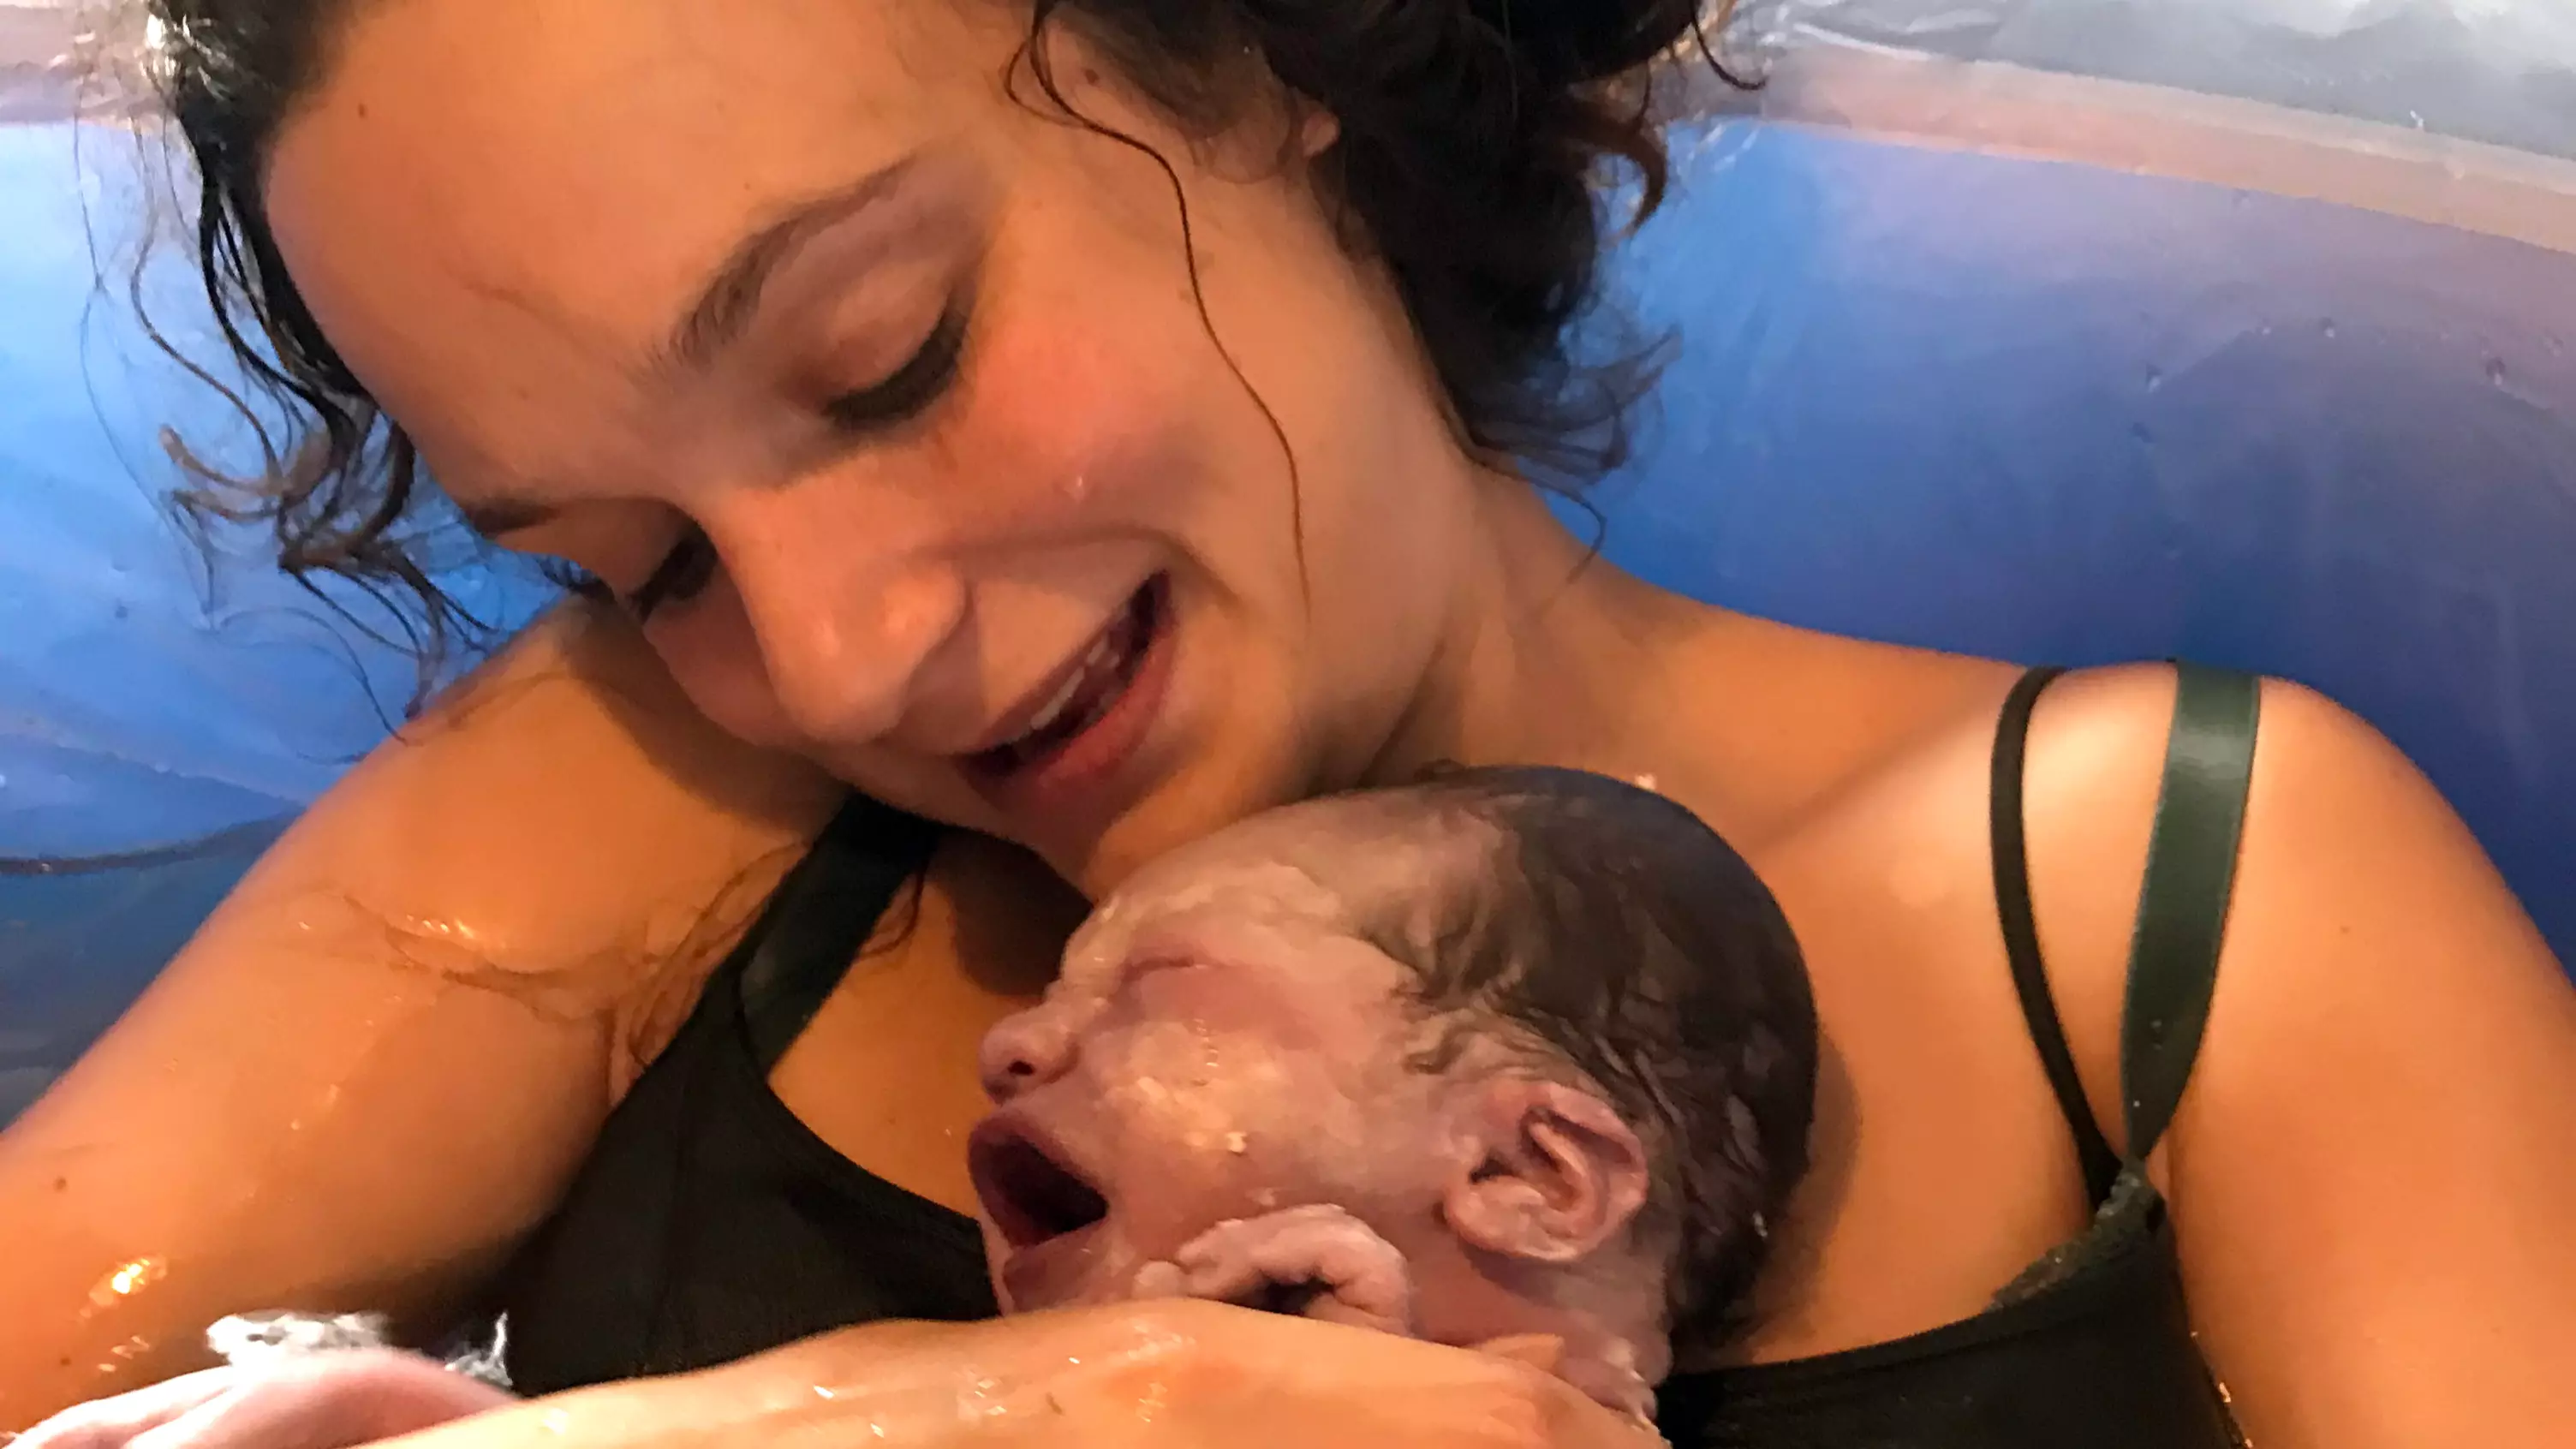 Mum Cried Every Time She Nursed Her Baby Due To 'Breastfeeding Dysphoria'